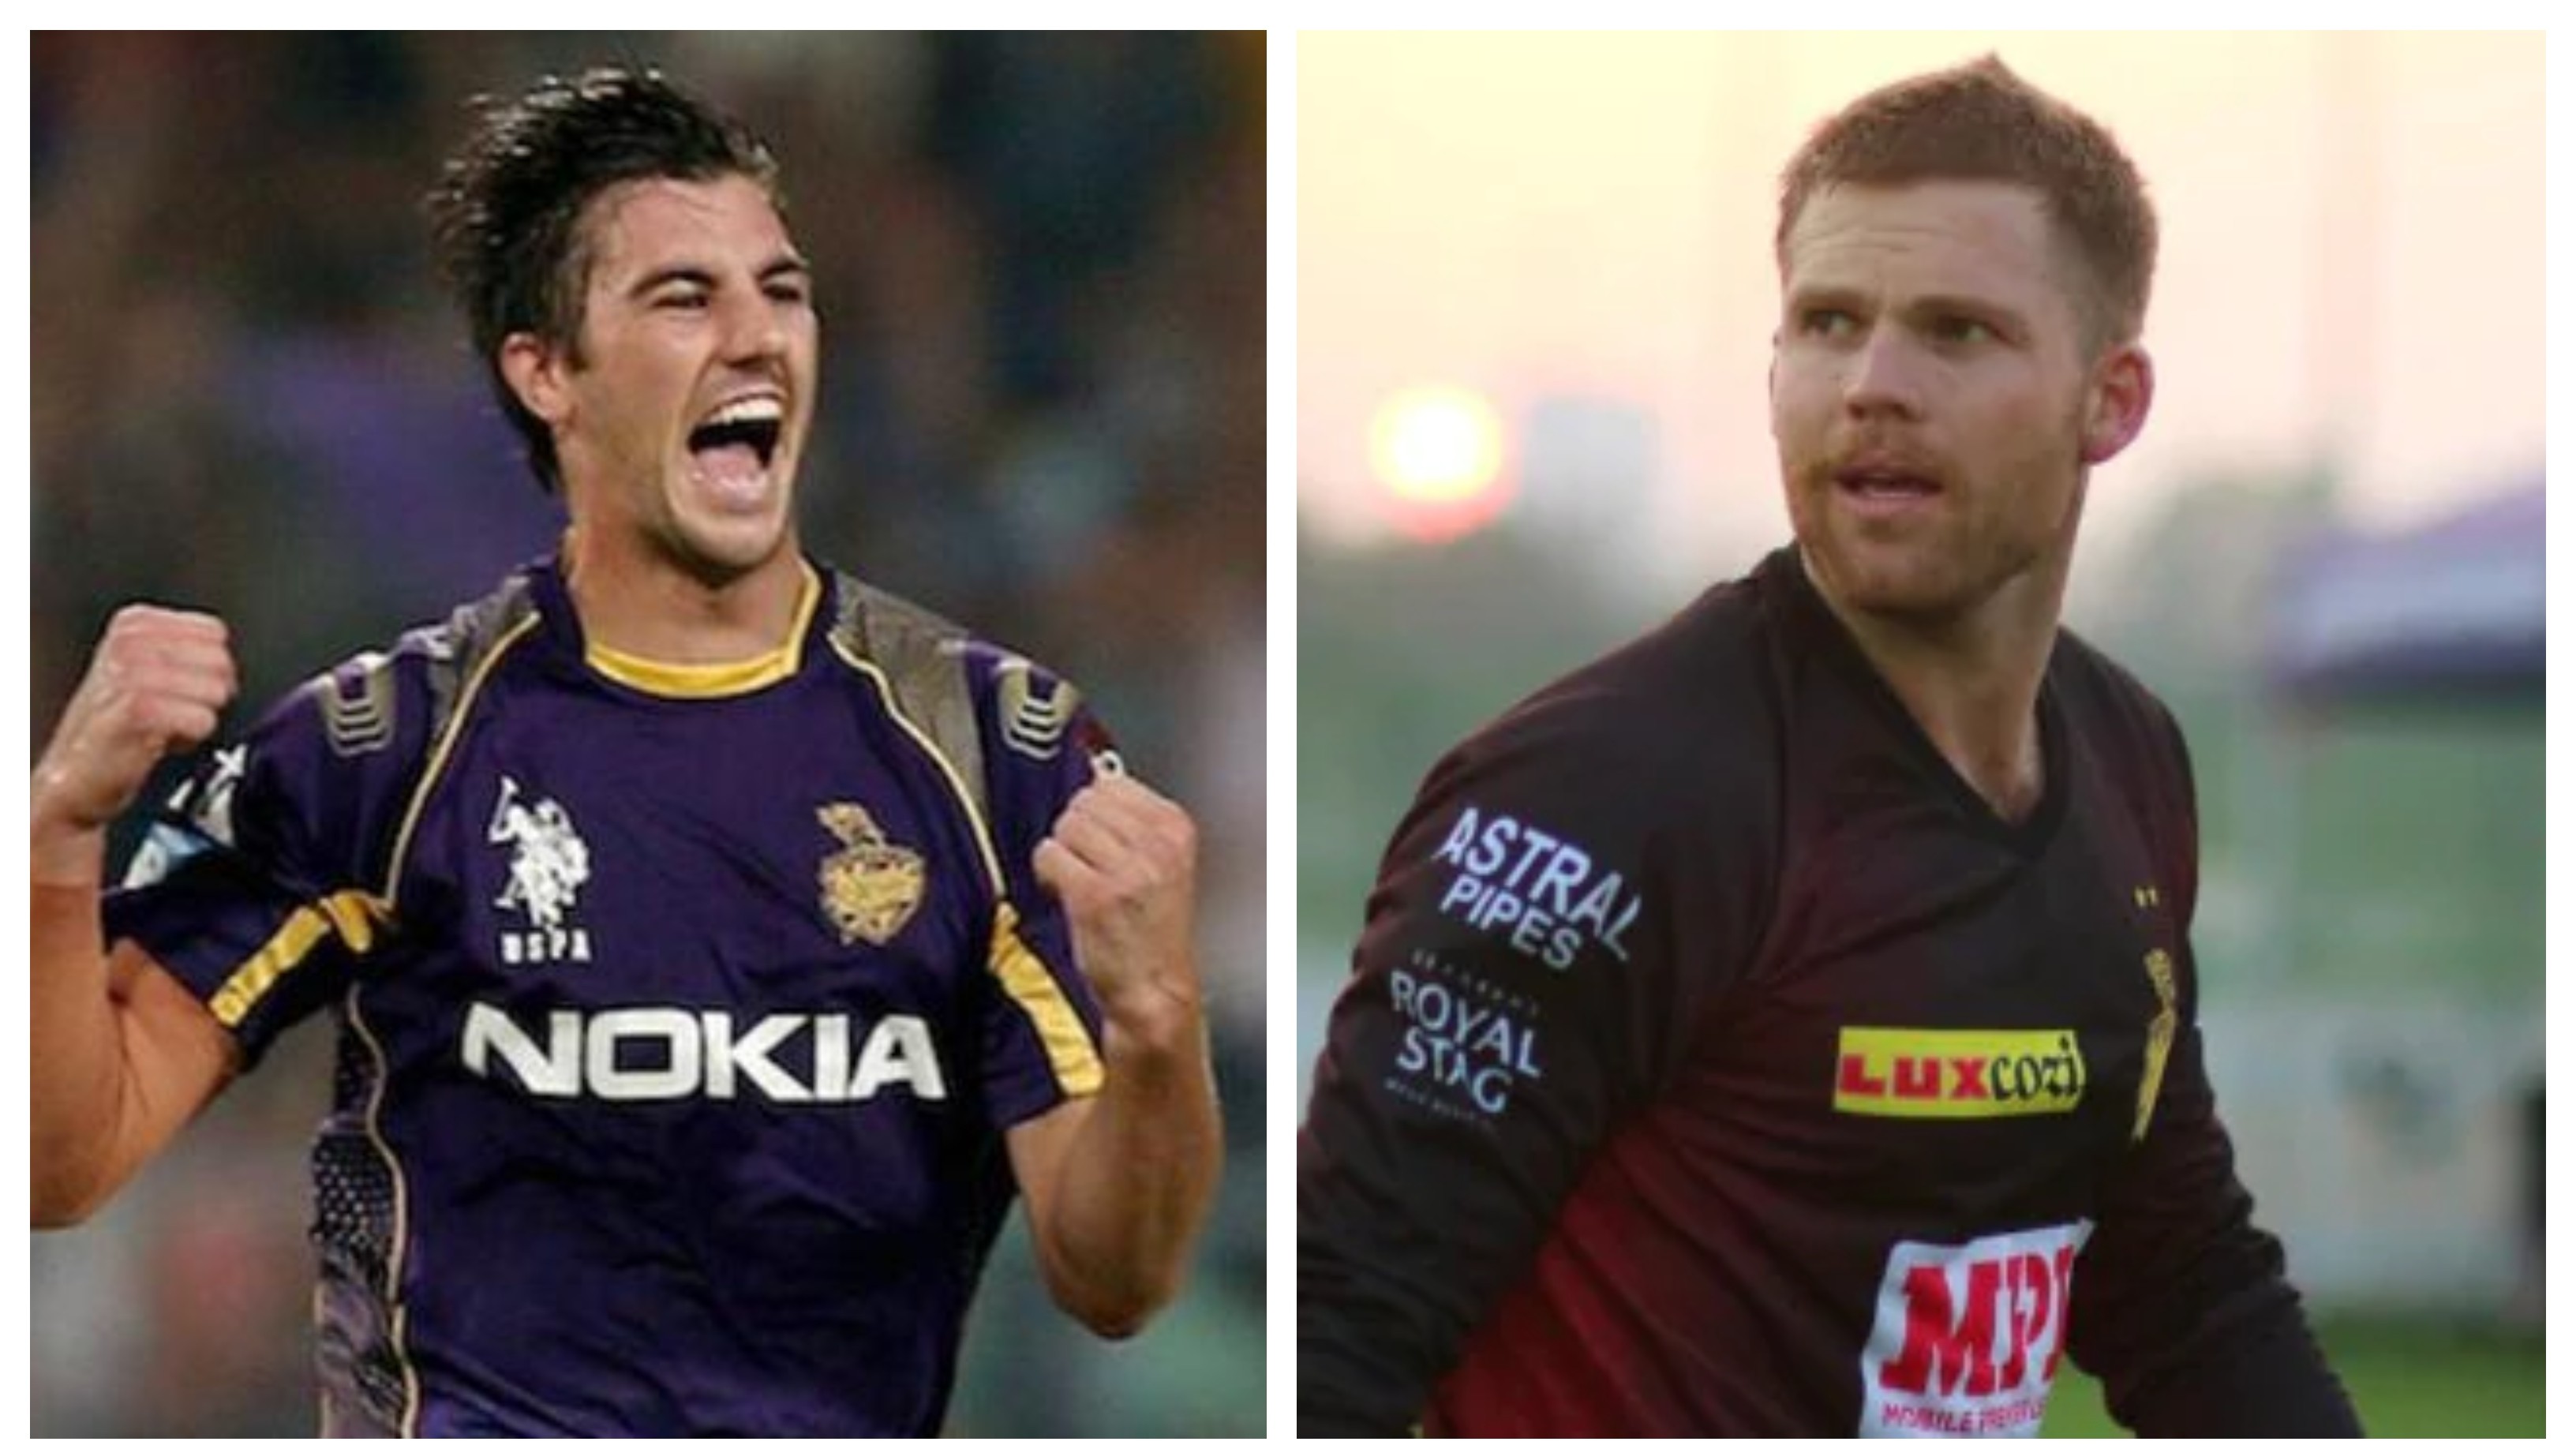 IPL 2020: “Pat Cummins texted me ‘how is the heat’ in UAE and I lied to him” – Lockie Ferguson